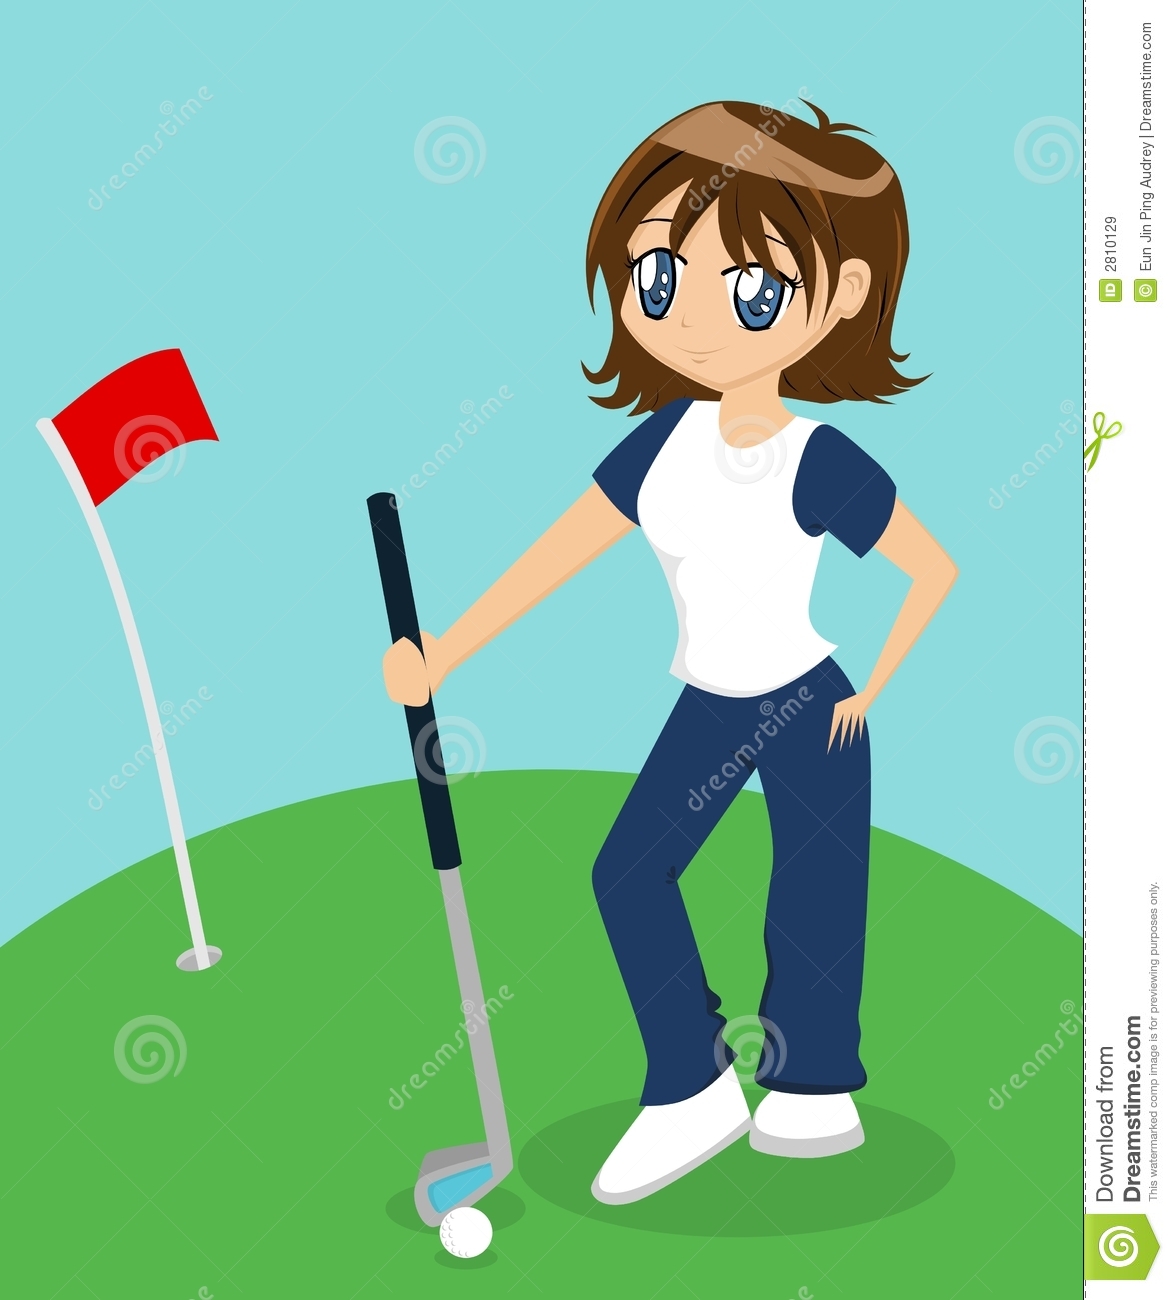 Girl Playing Golf Royalty Free Stock Images   Image  2810129